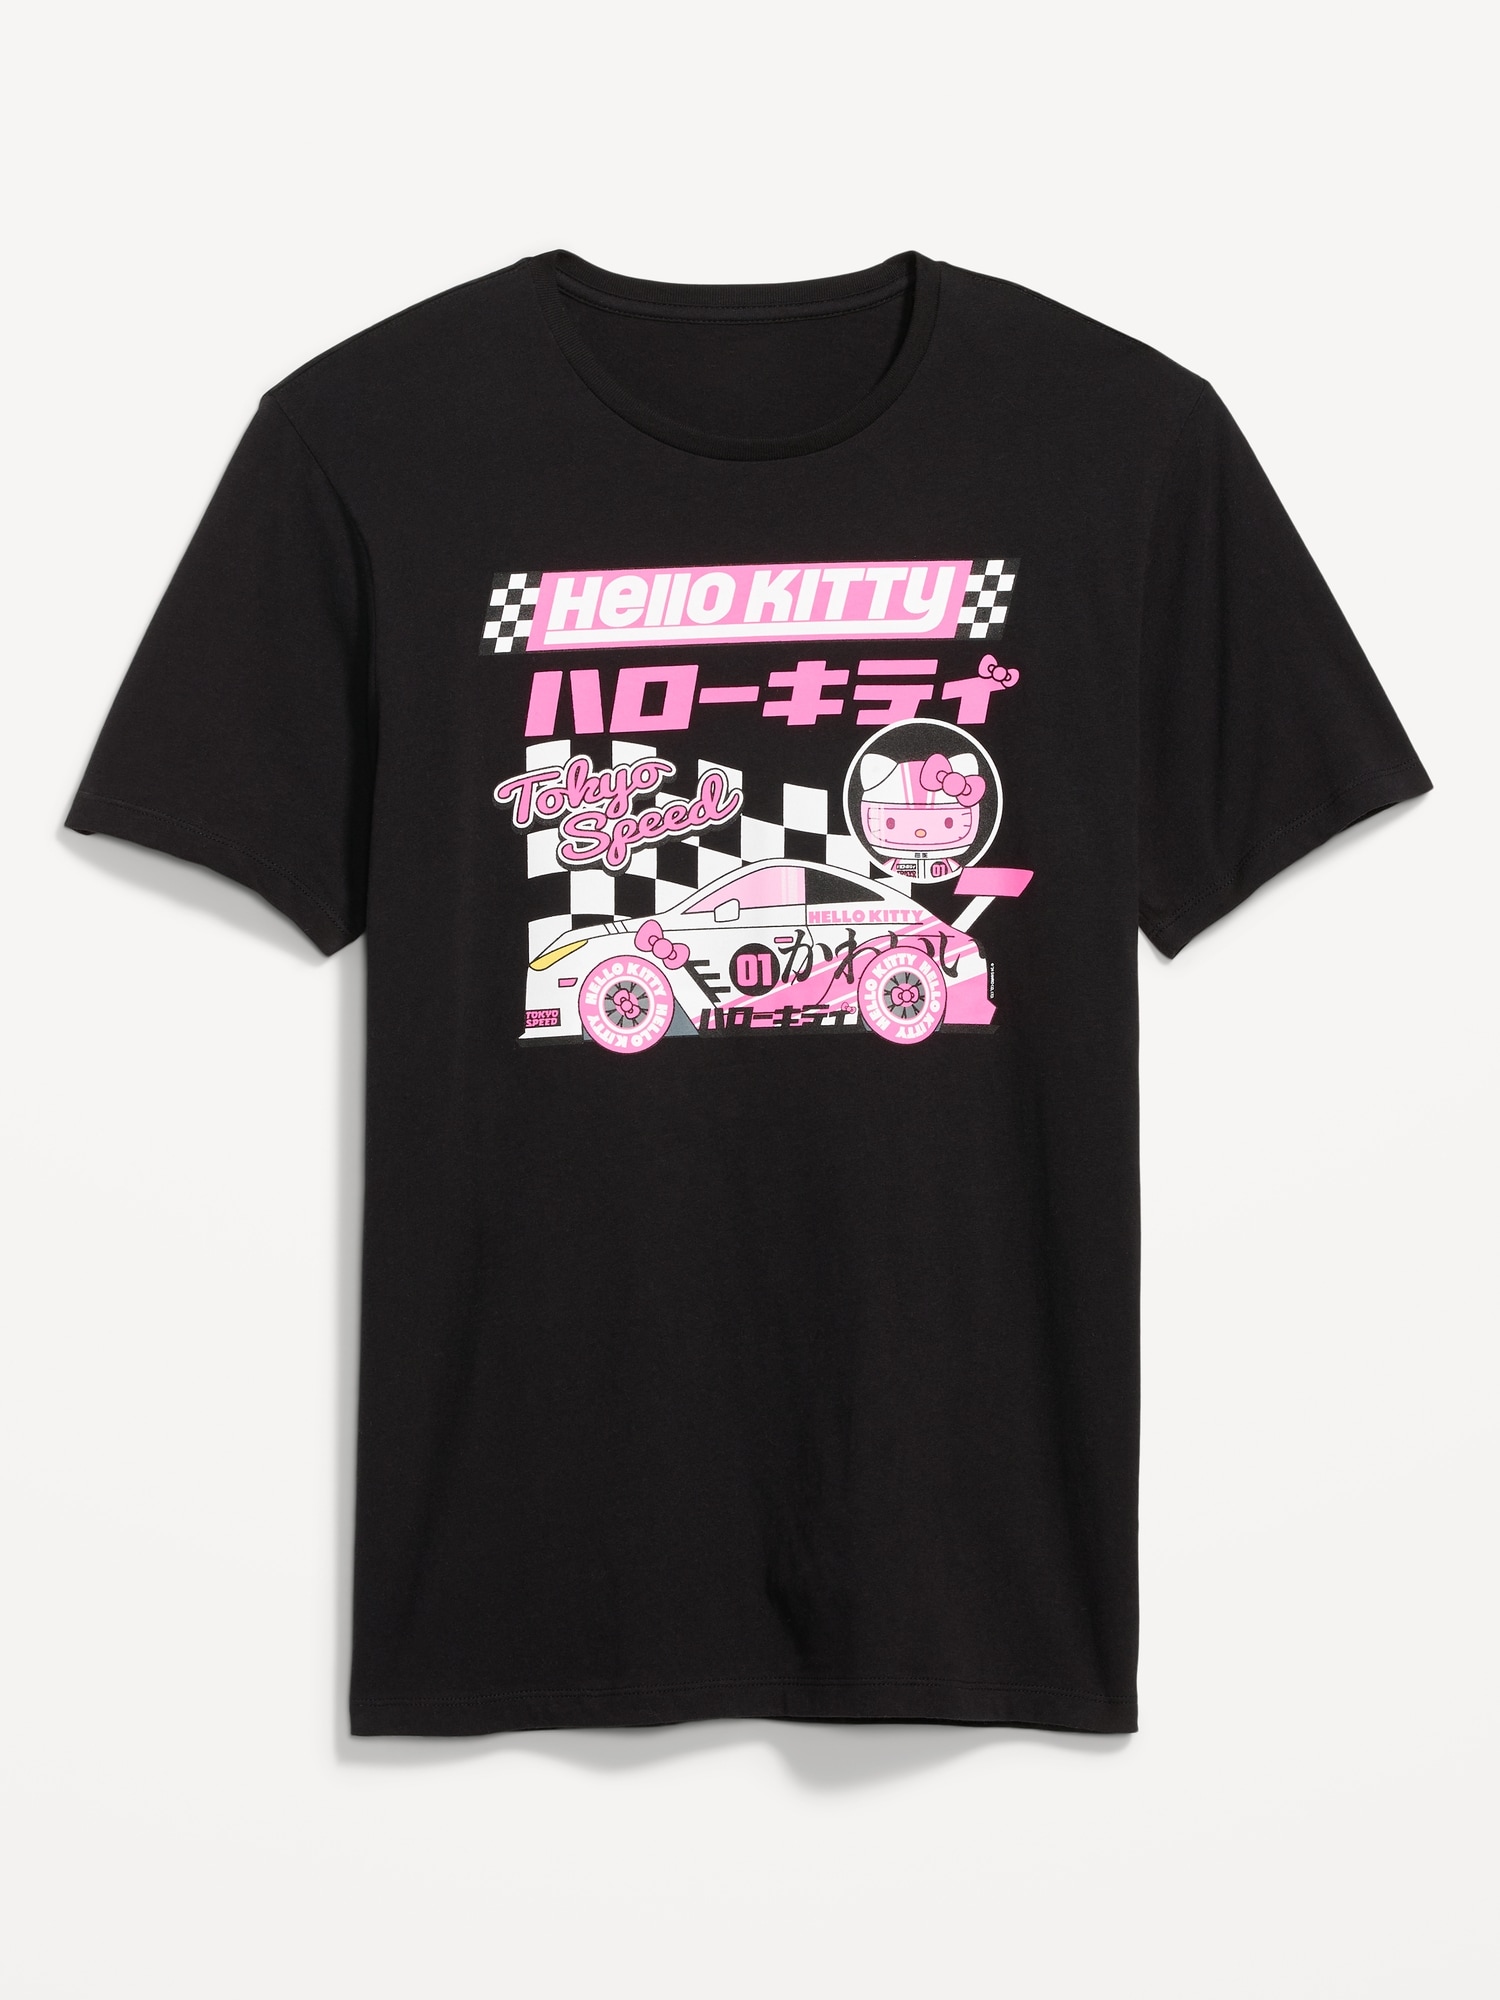 Hello Kitty® Gender-Neutral T-Shirt for Adults